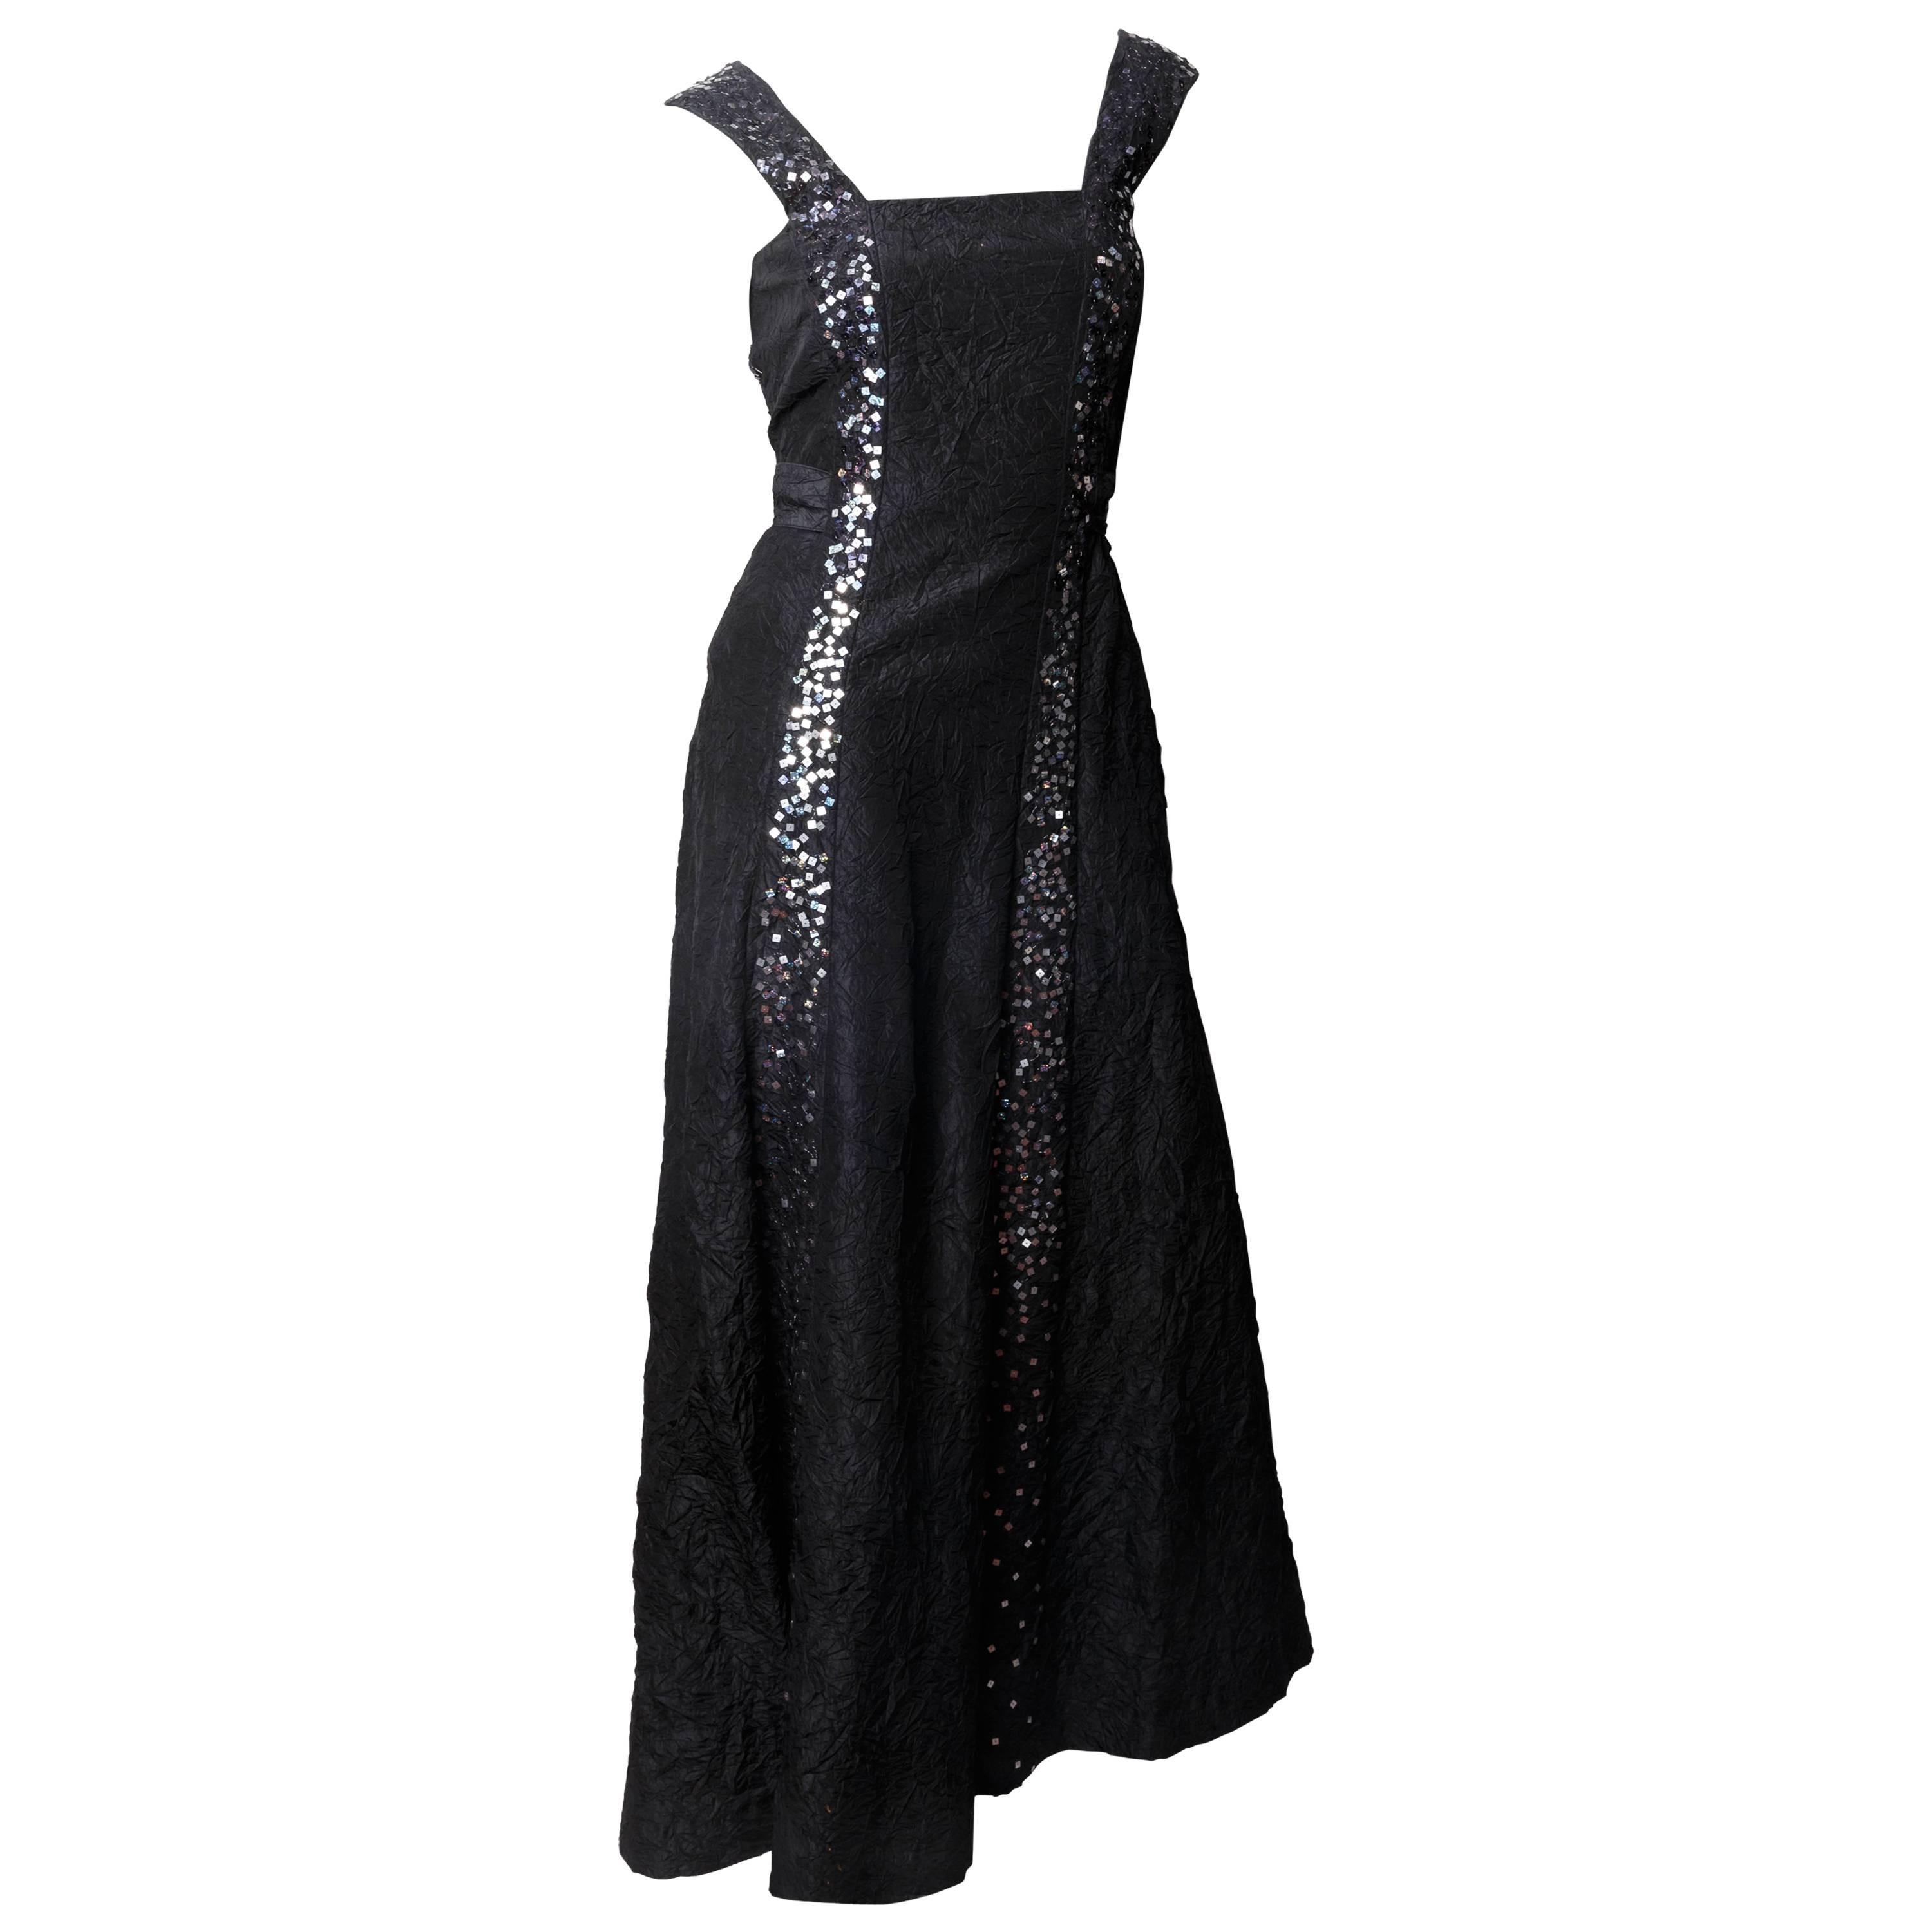 Chanel Silk Evening Gown with Sequin Embellishment